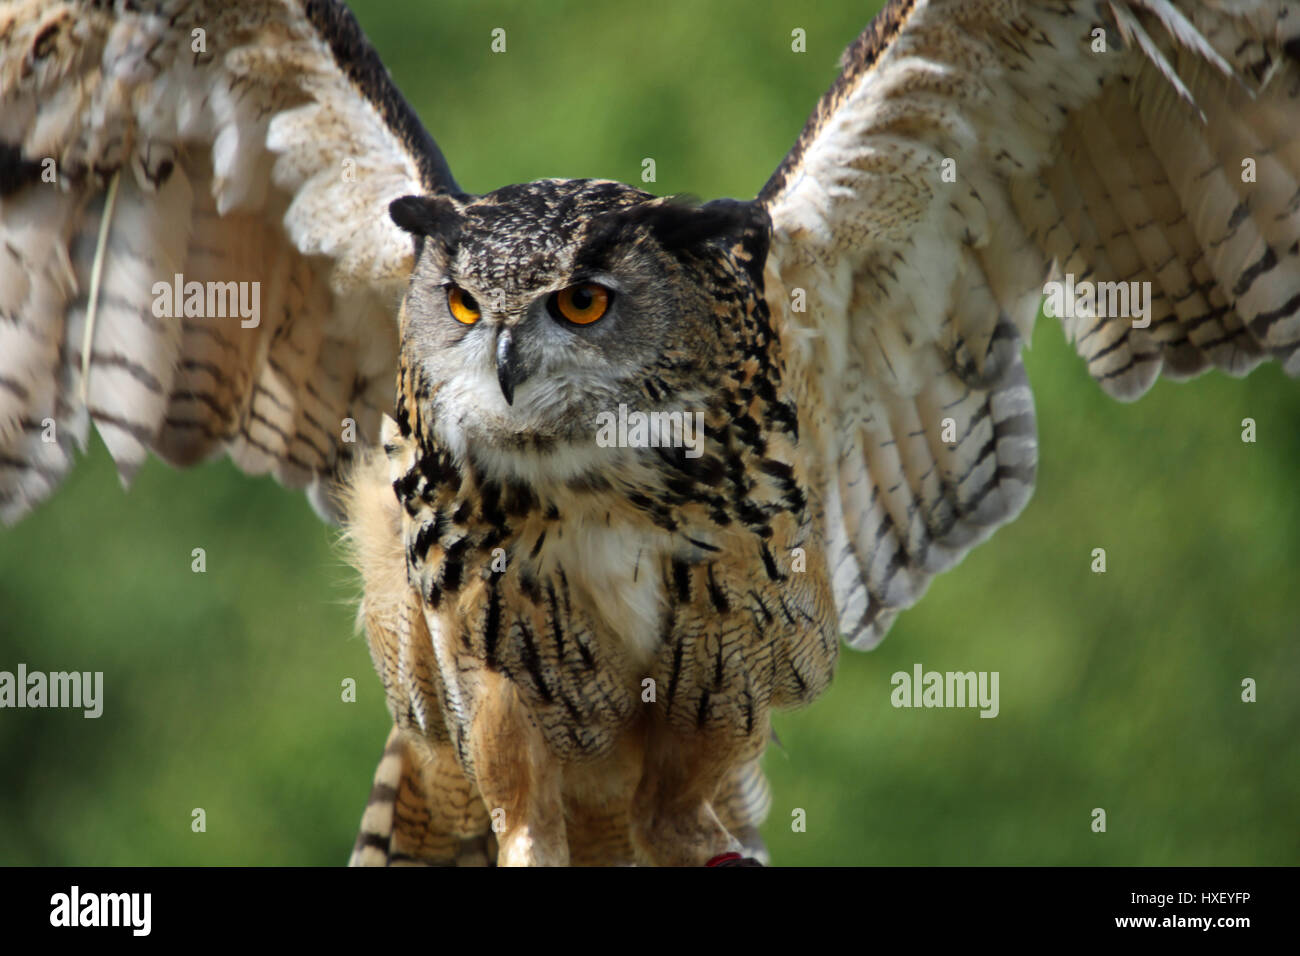 A magnificent Eagle Owl sitting on a perch flapping its wings Stock Photo